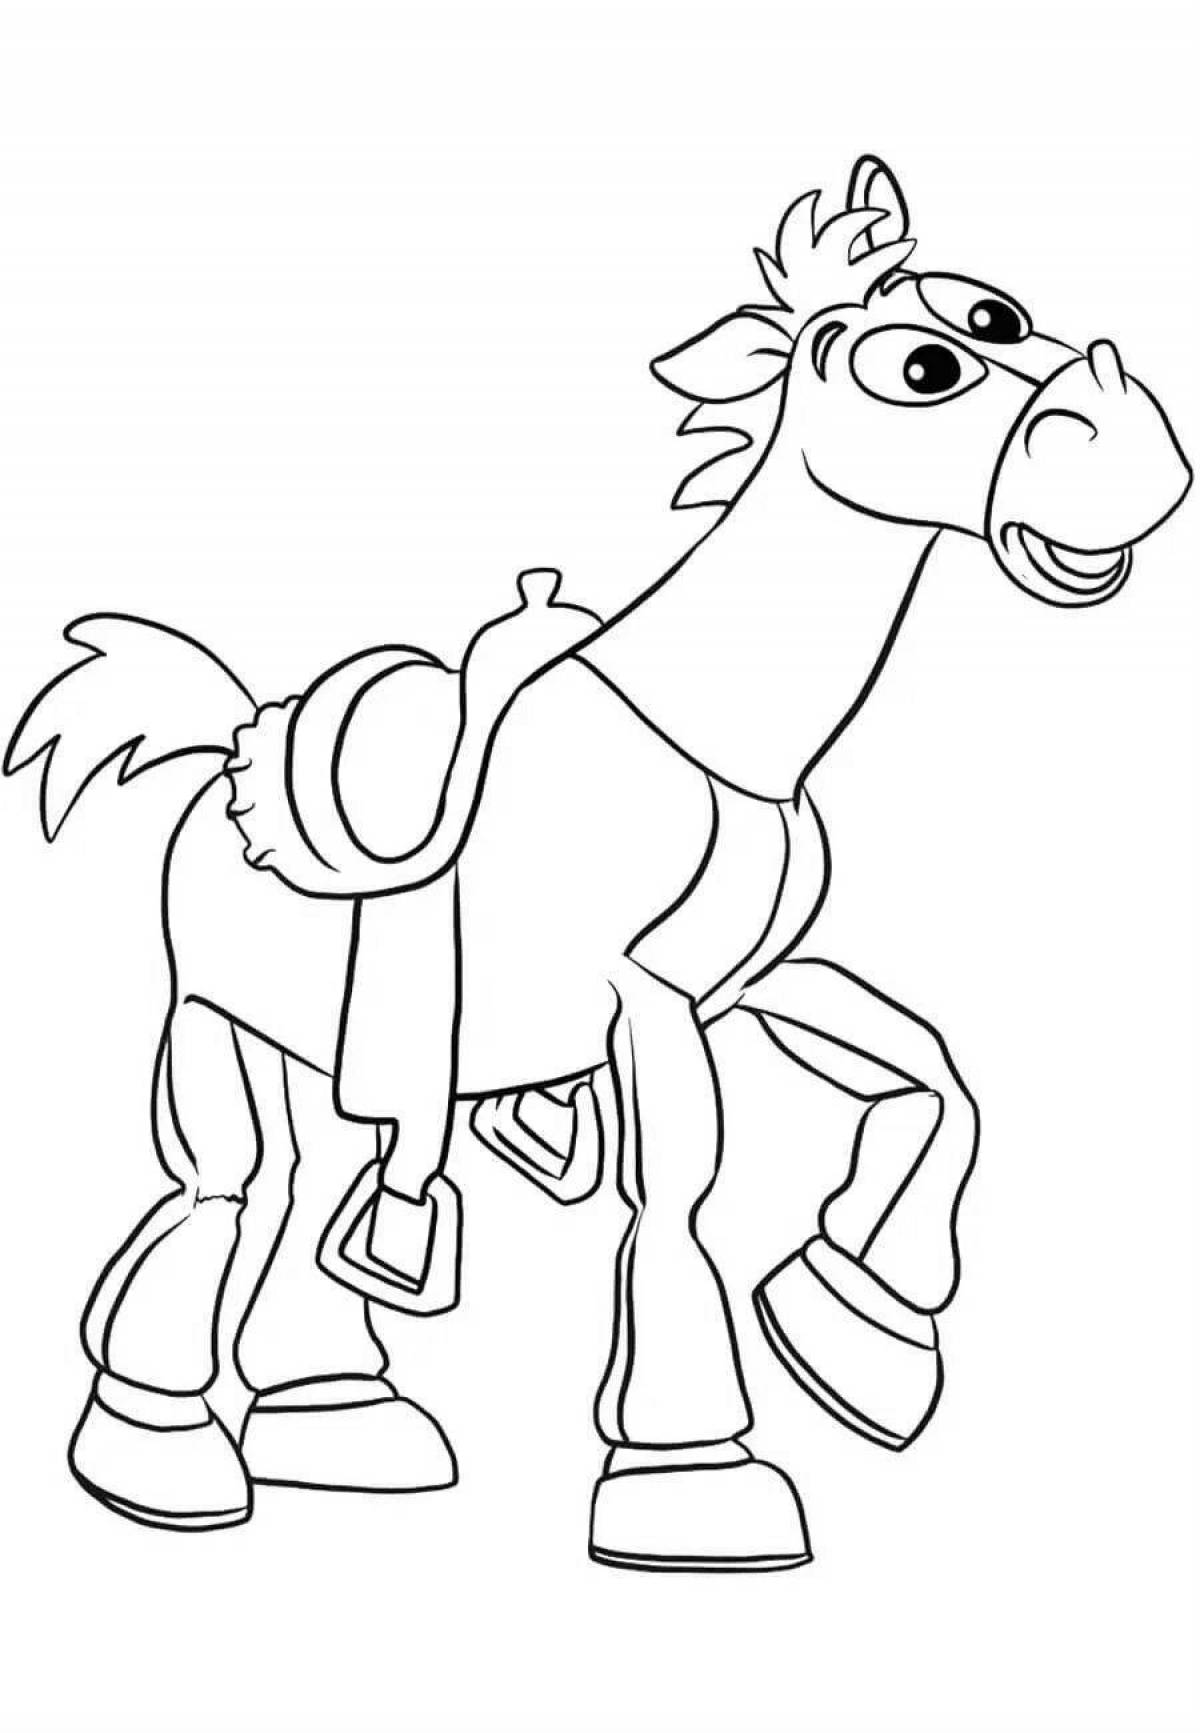 Gorgeously colored lanky horse coloring page